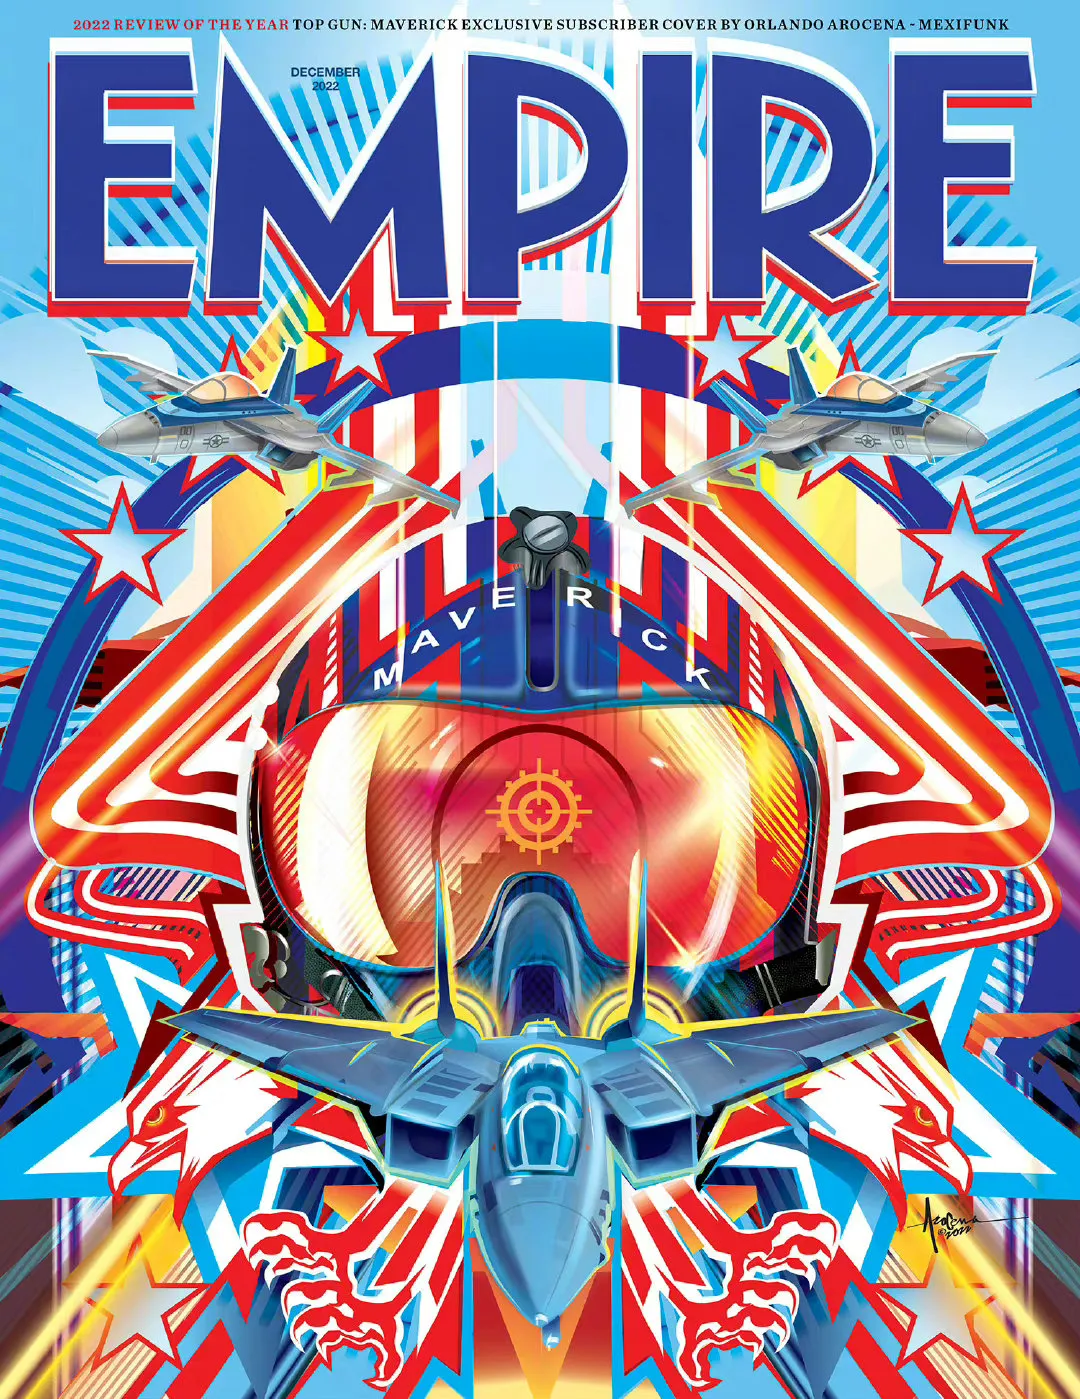 "Empire" Magazine's 2022 Hollywood Hits Movies & TV Special Issue Cover + Subscription Edition Cover Revealed | FMV6